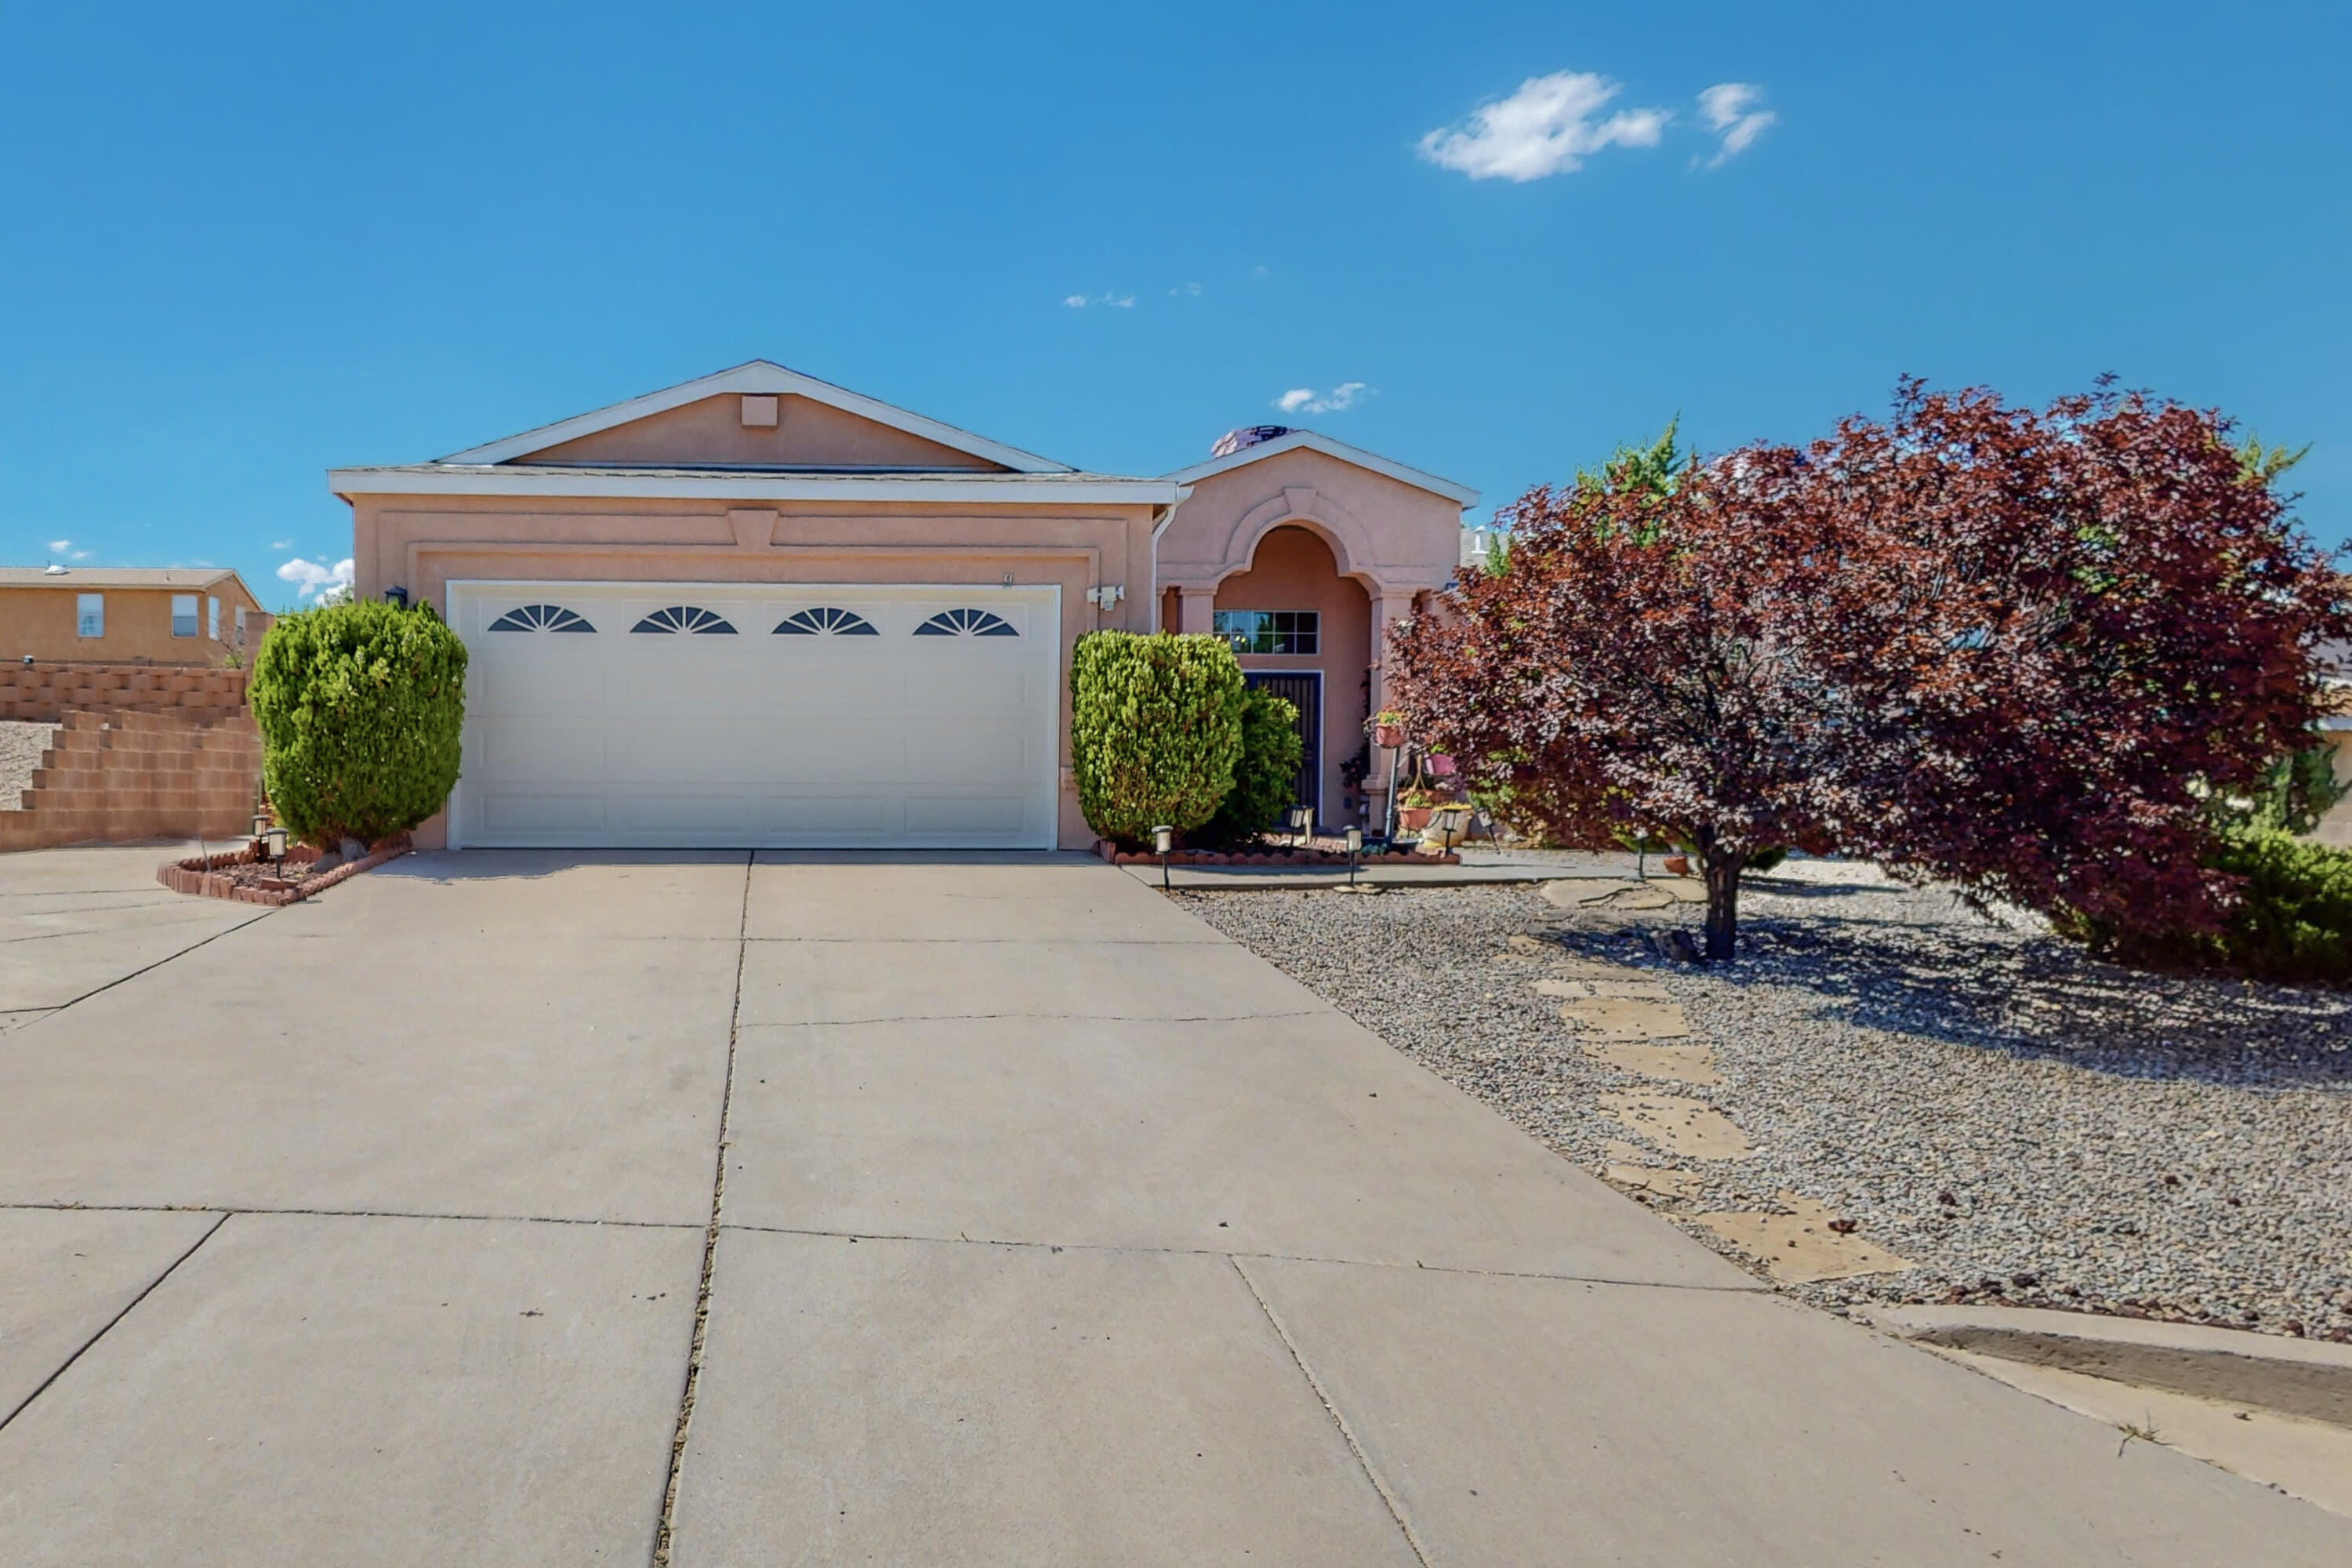 29 Parkside Road SE, Rio Rancho, New Mexico 87124, 4 Bedrooms Bedrooms, ,2 BathroomsBathrooms,Residential,For Sale,29 Parkside Road SE,1061991